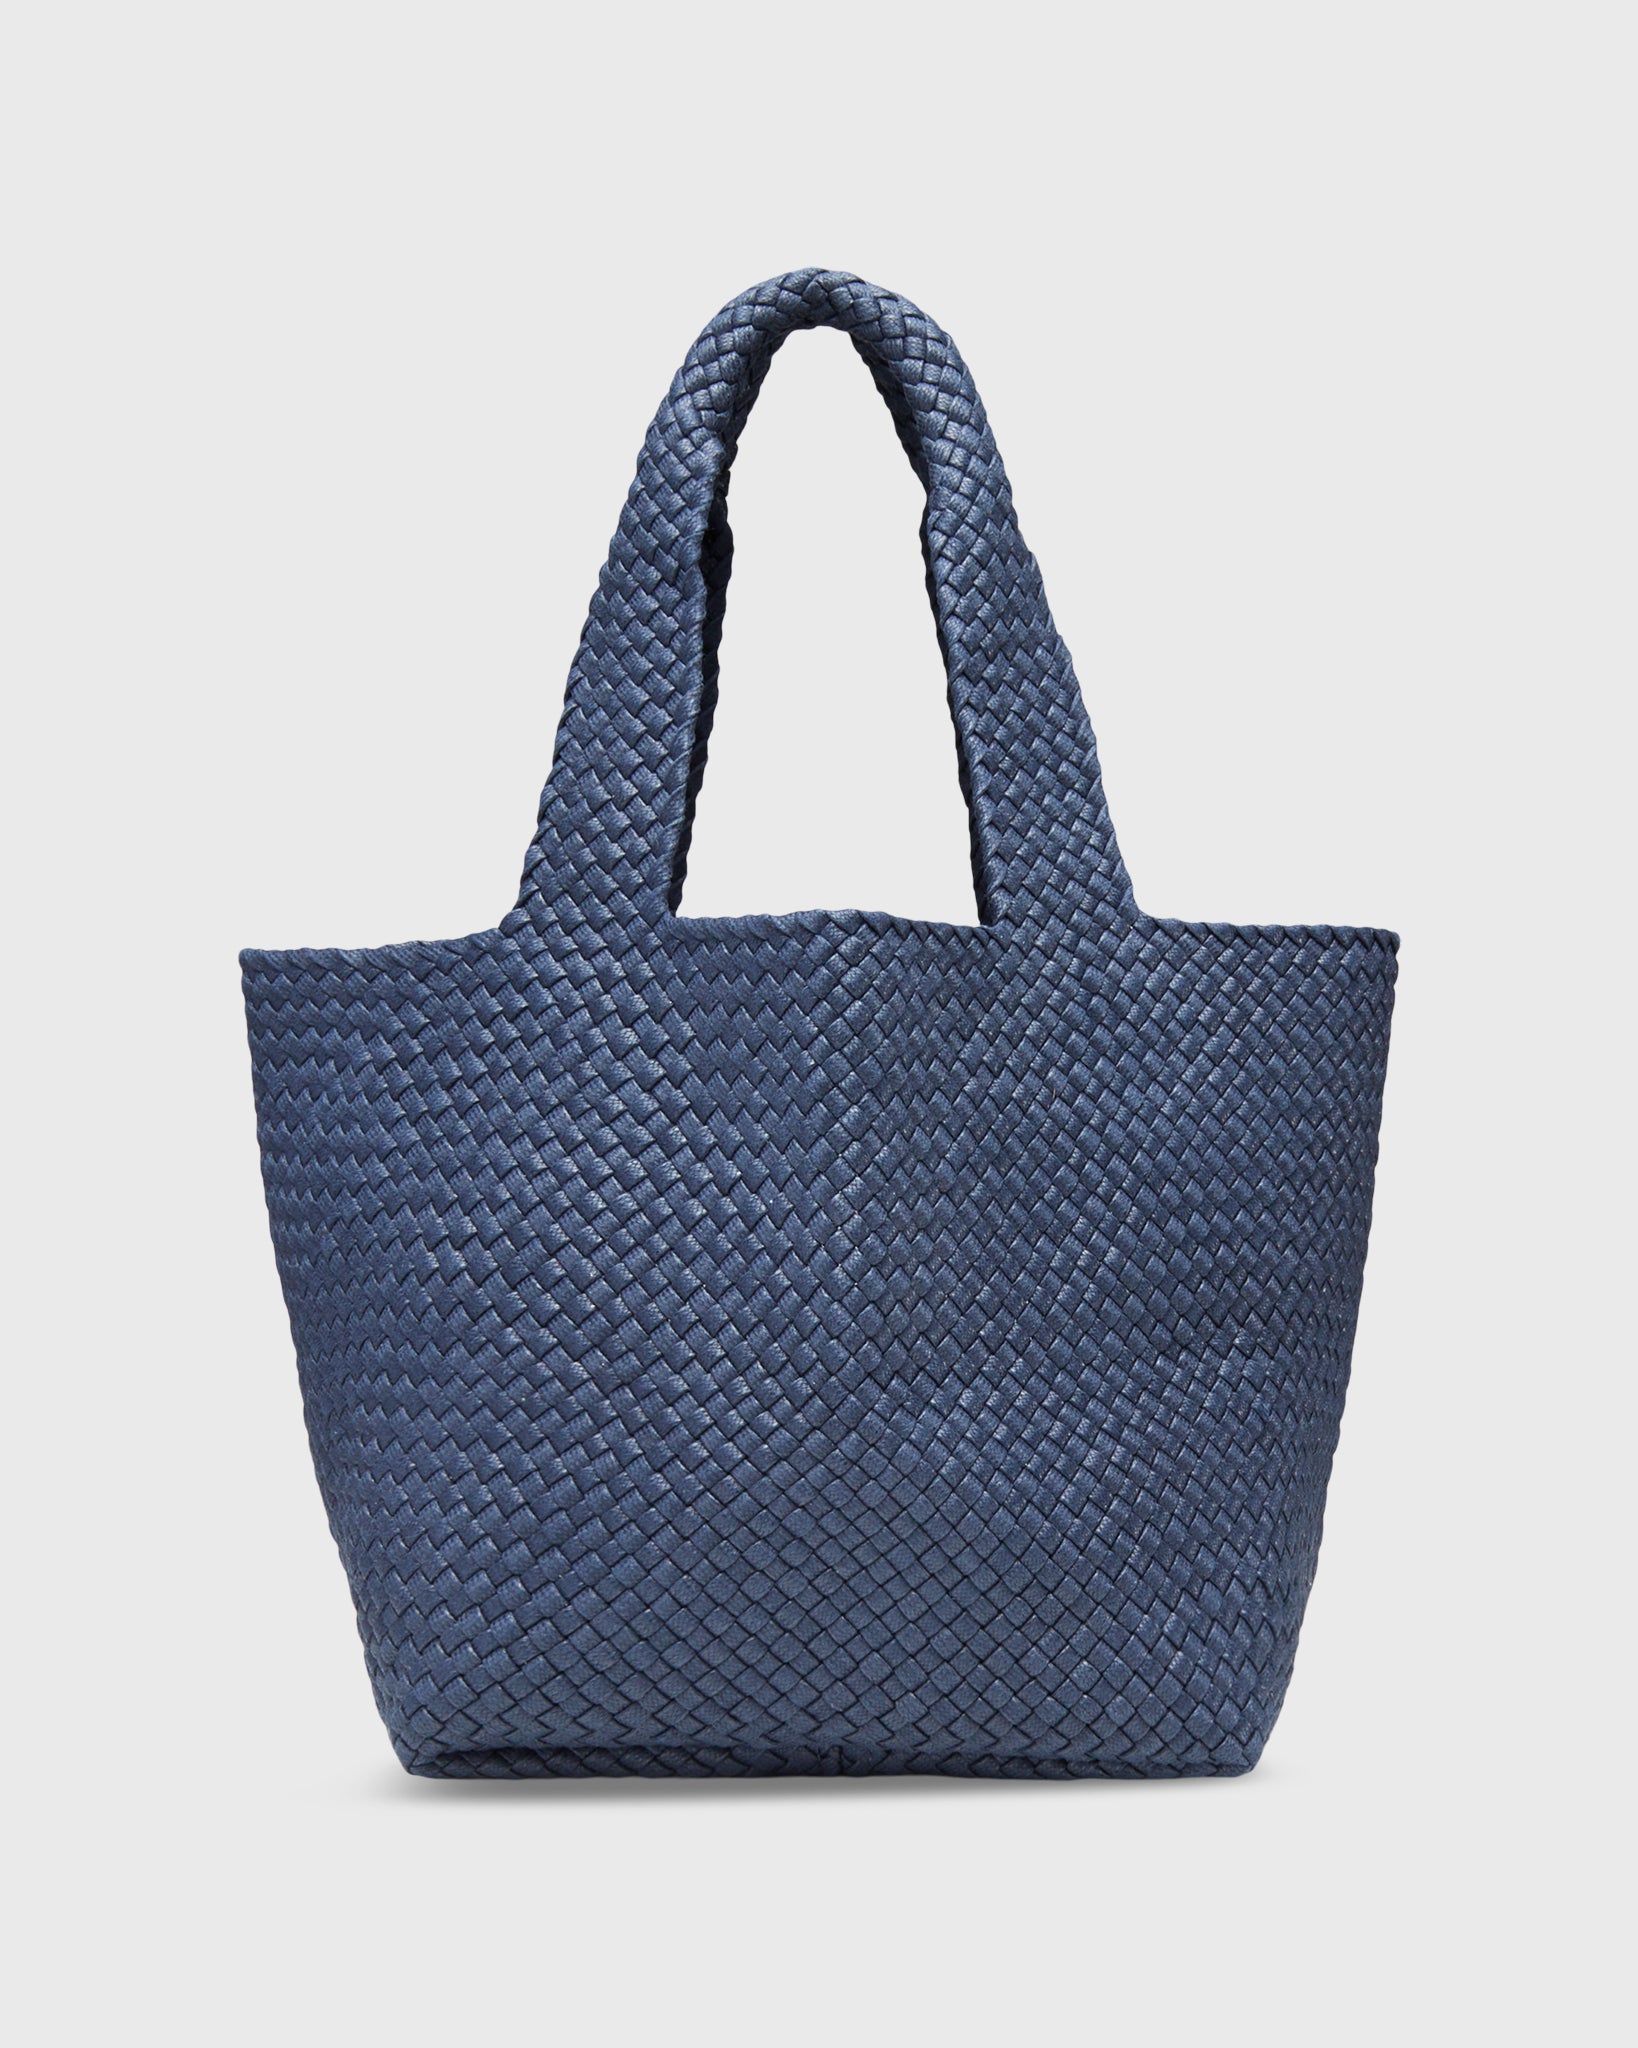 Handwoven Paola Bucket Bag in Navy Coated Cotton